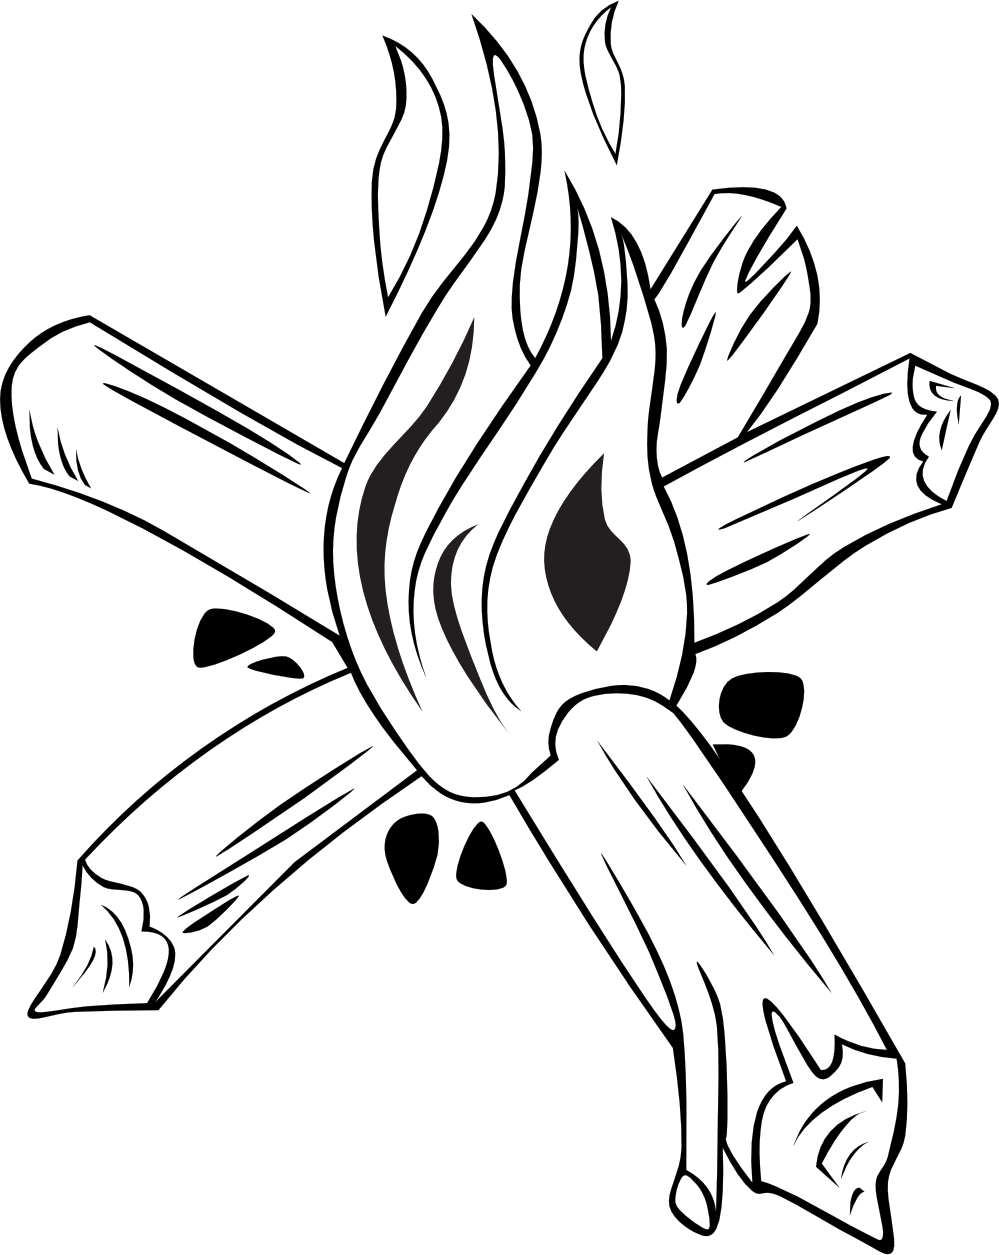 Campfire Black And White | Clipart Panda - Free Clipart Images